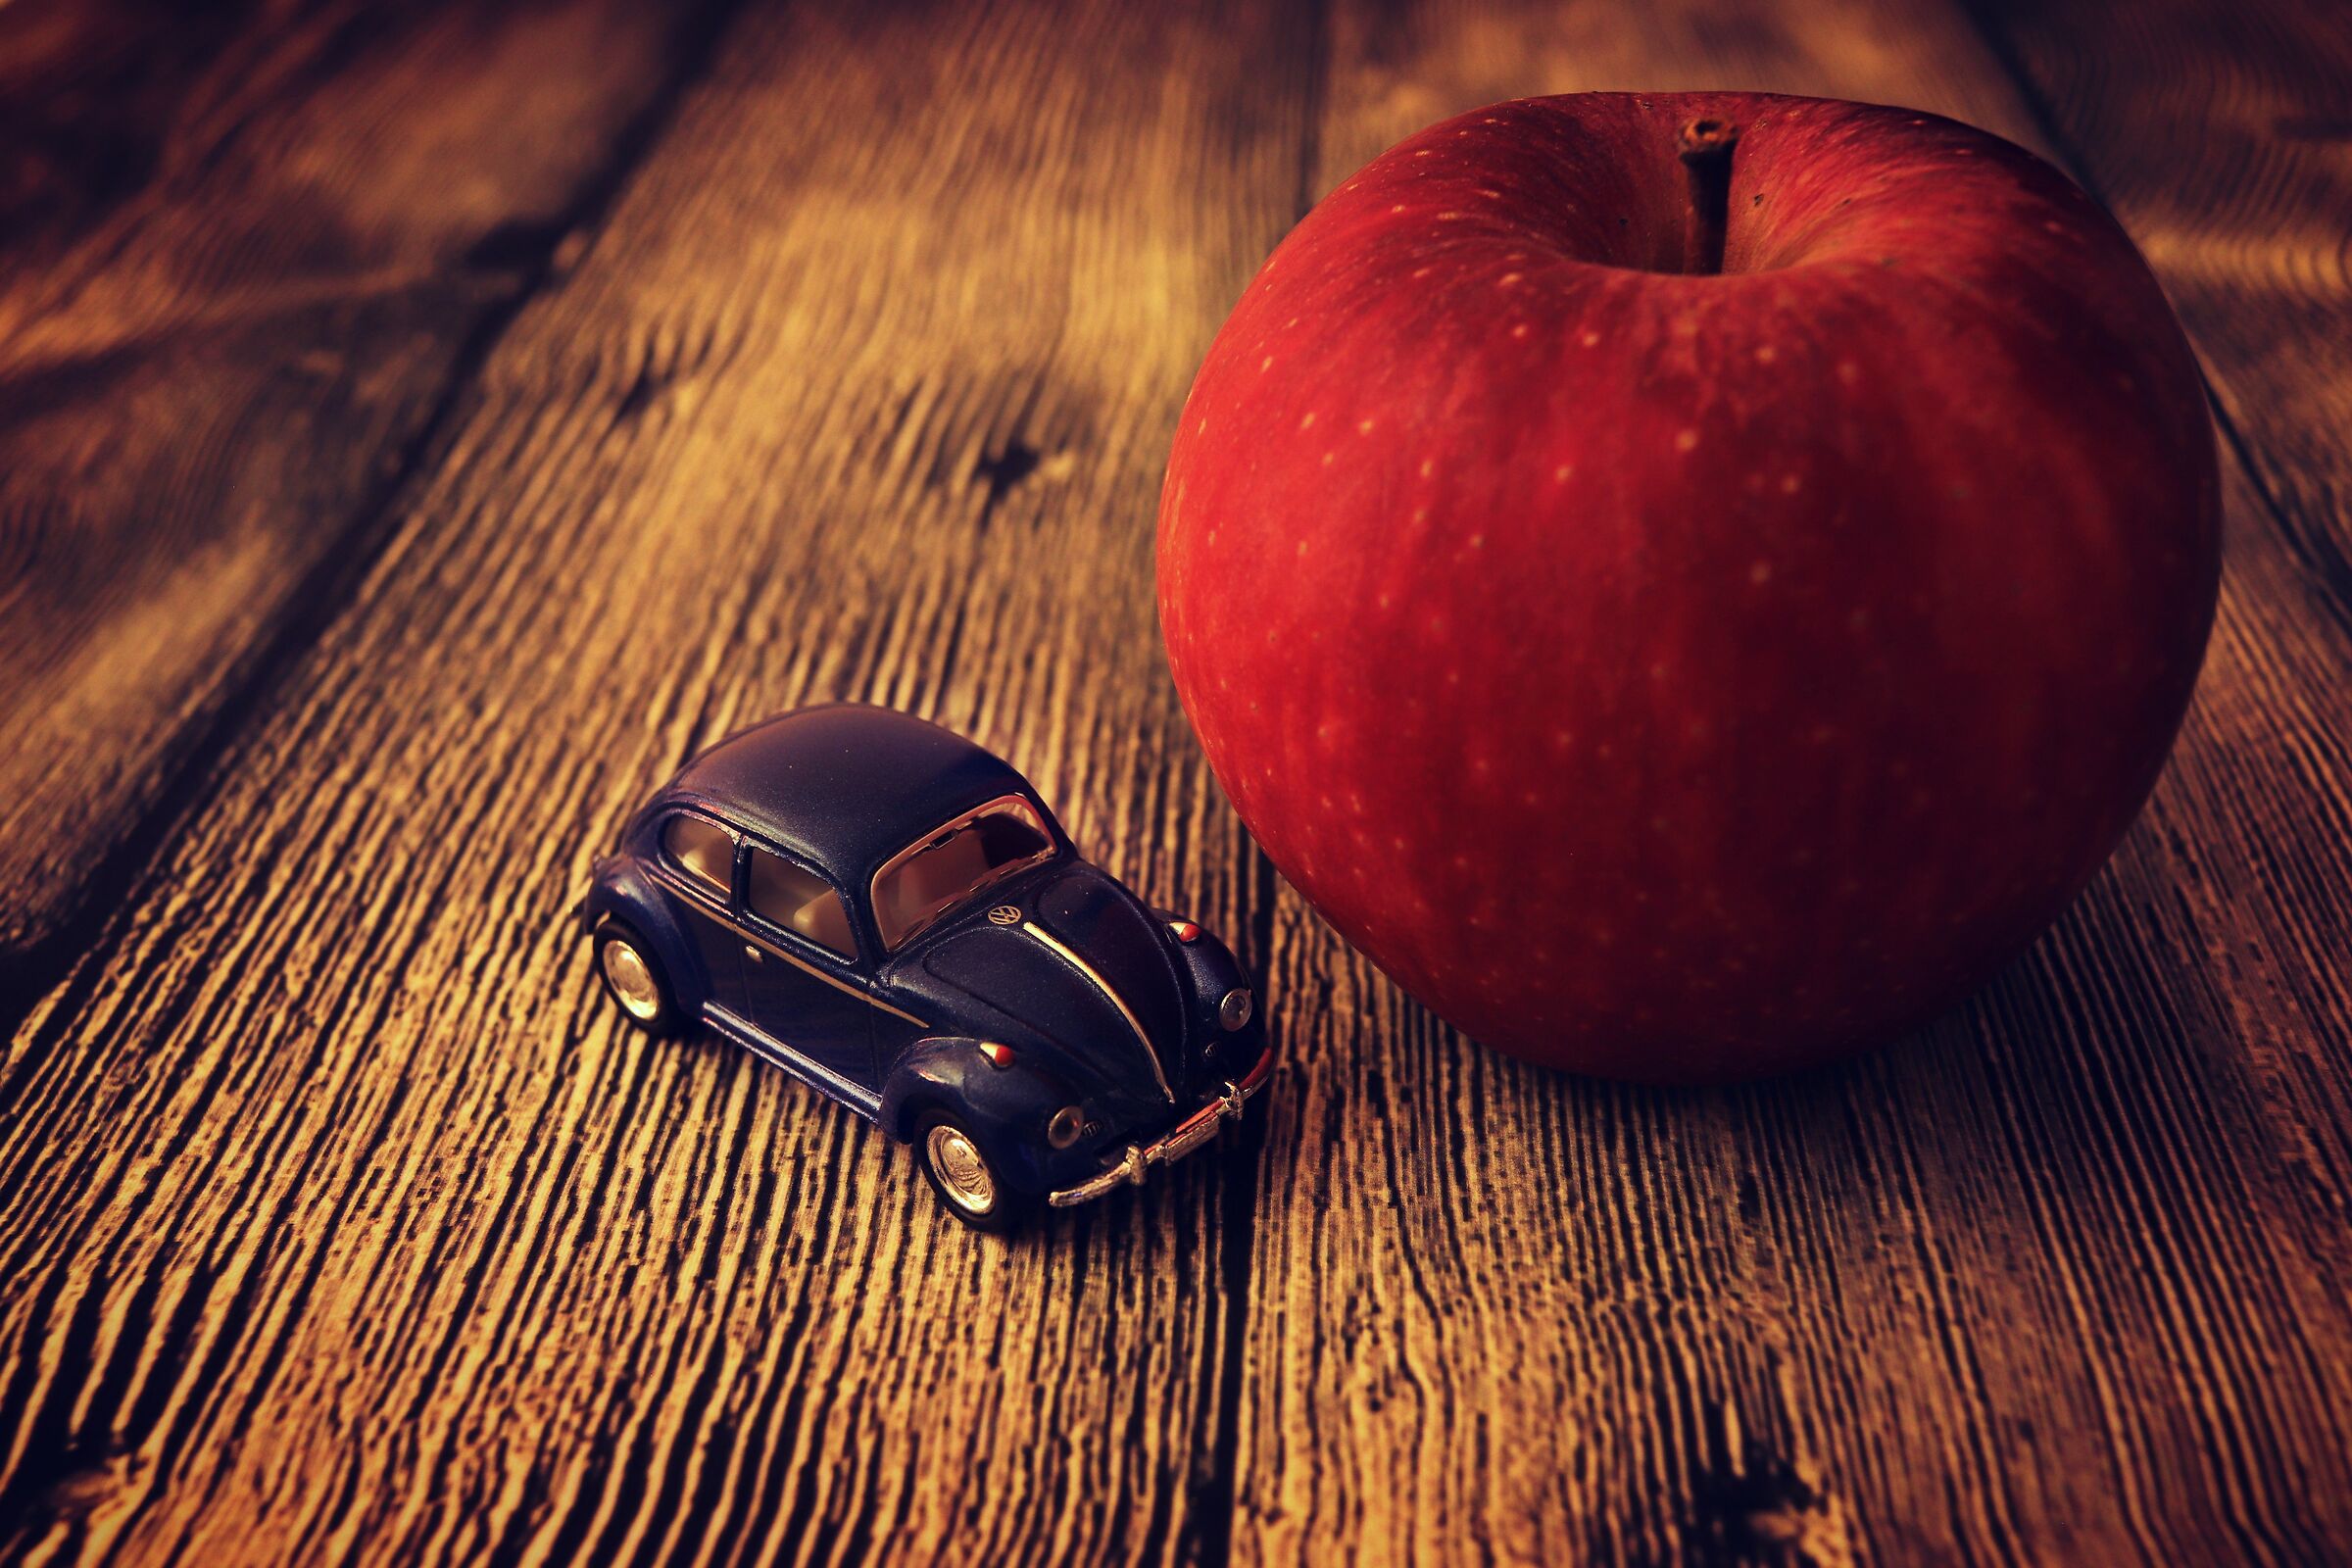 The apple and the beetle...